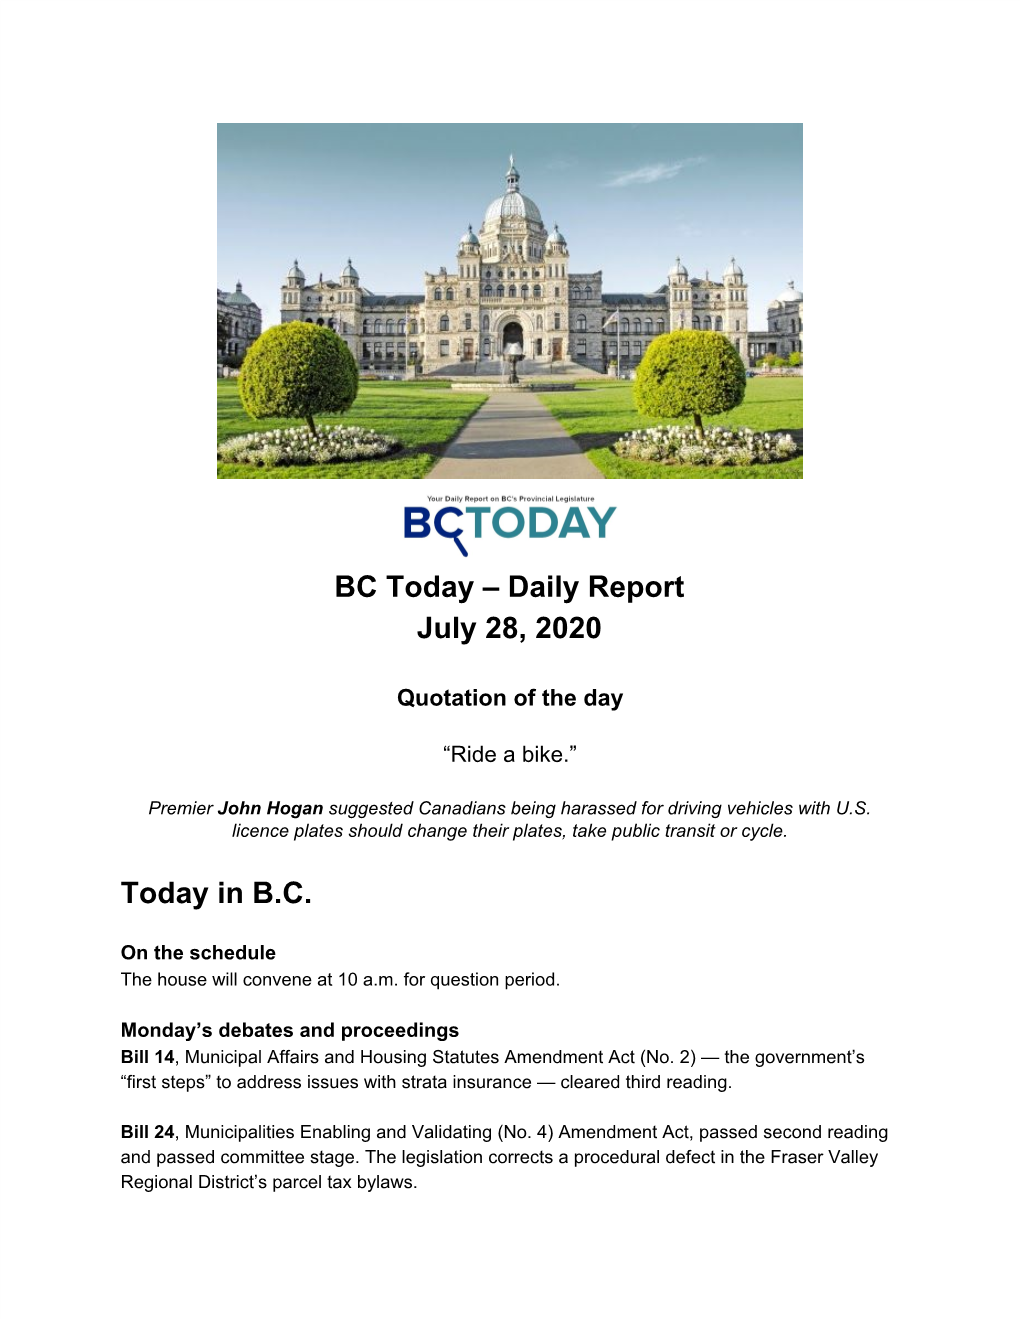 BC Today – Daily Report July 28, 2020 Today in B.C